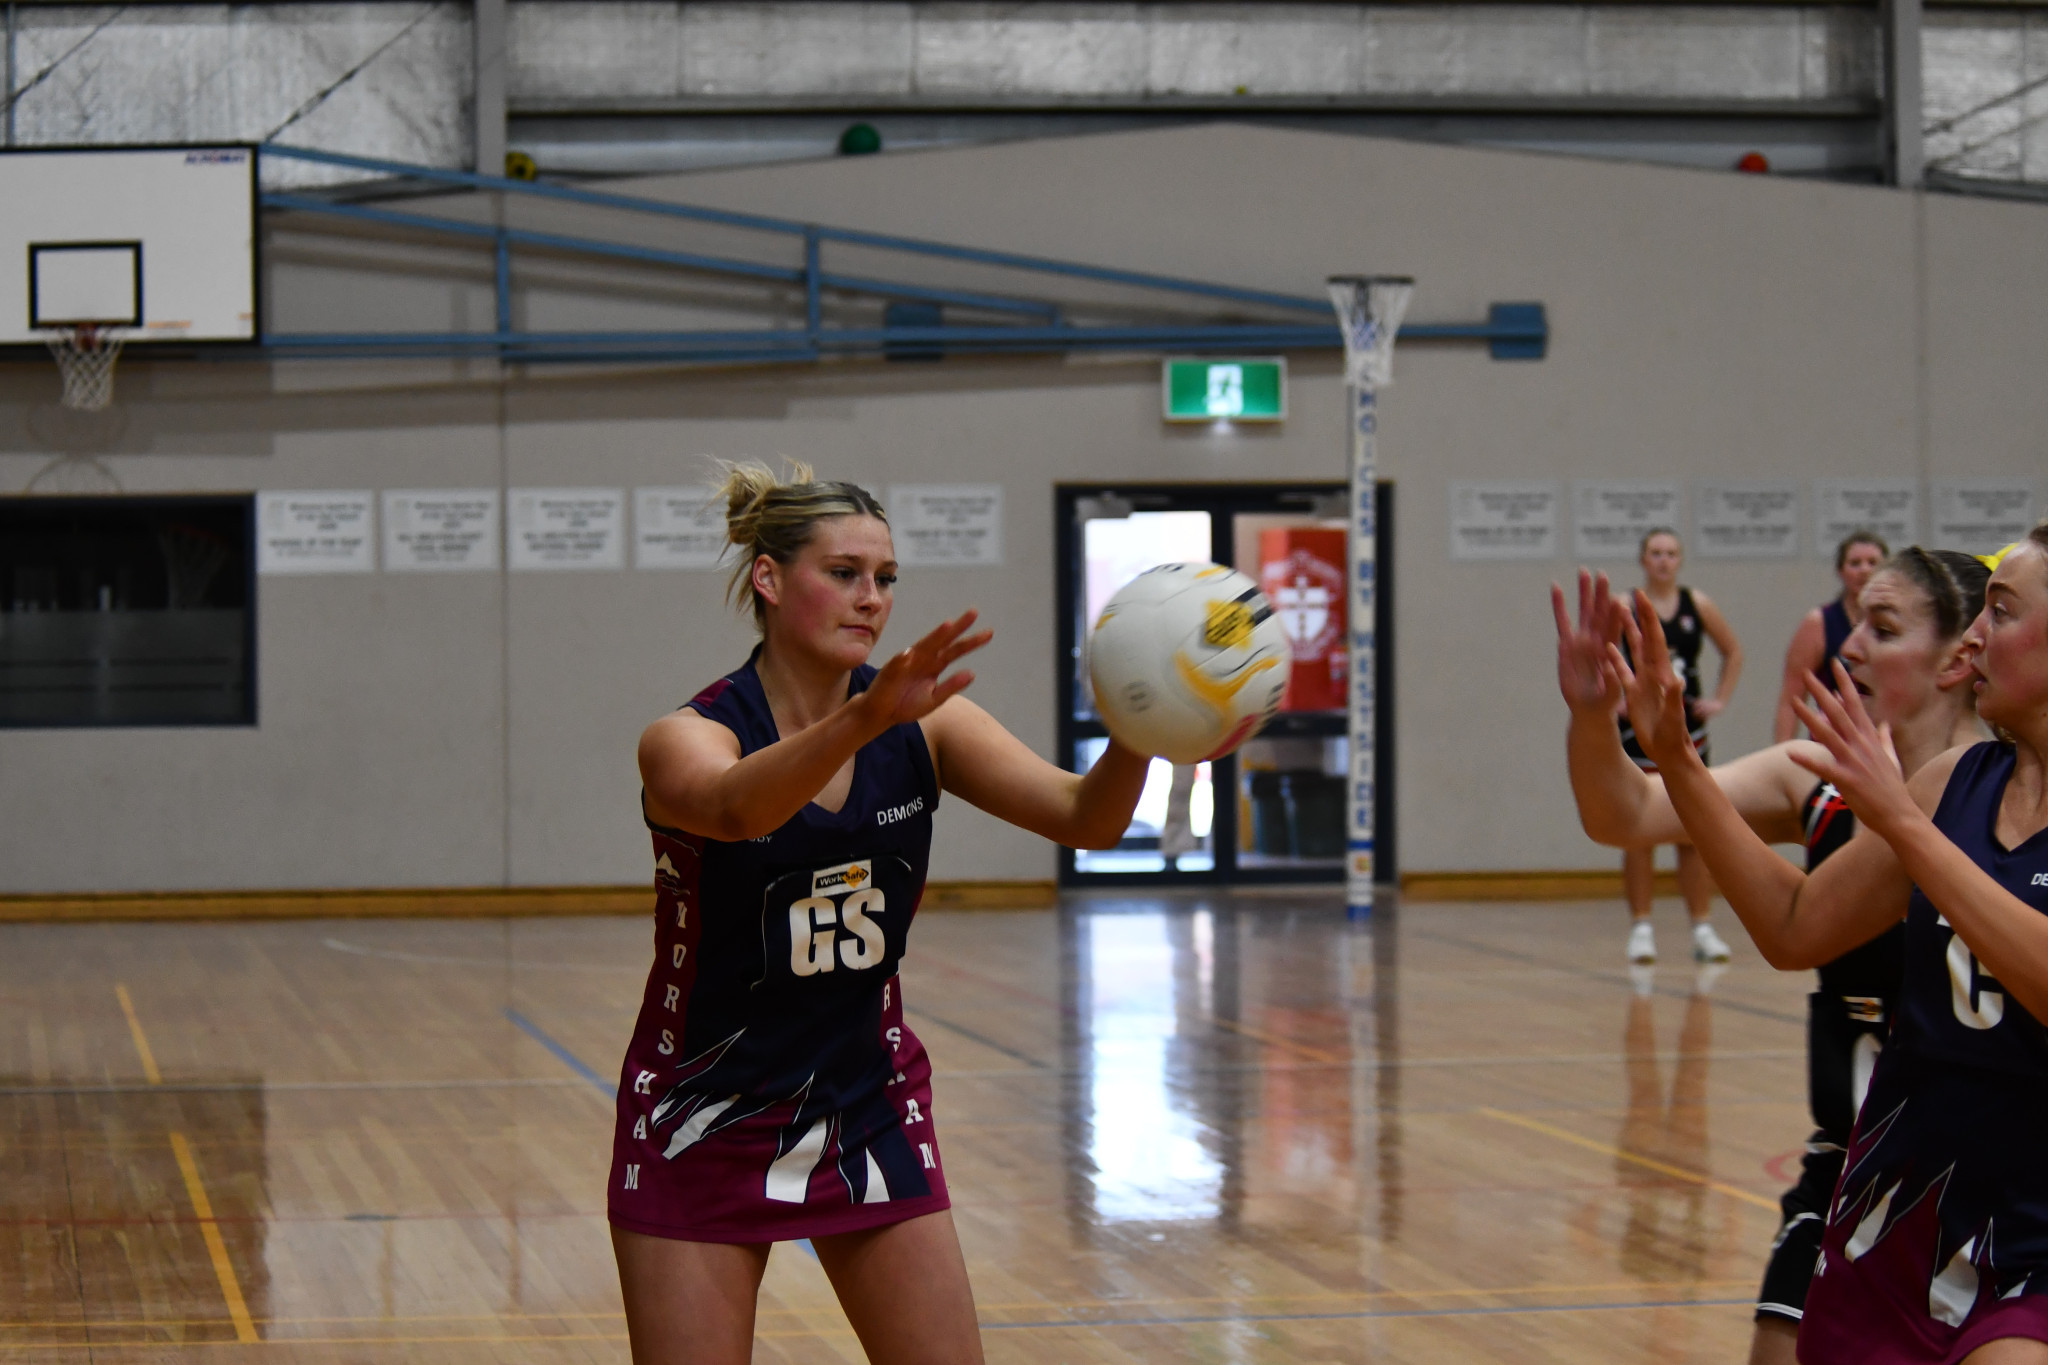 Imogen Worthy scored 34 goals and now moves into second in the goal shooting. PHOTO: TONY TOMLINS